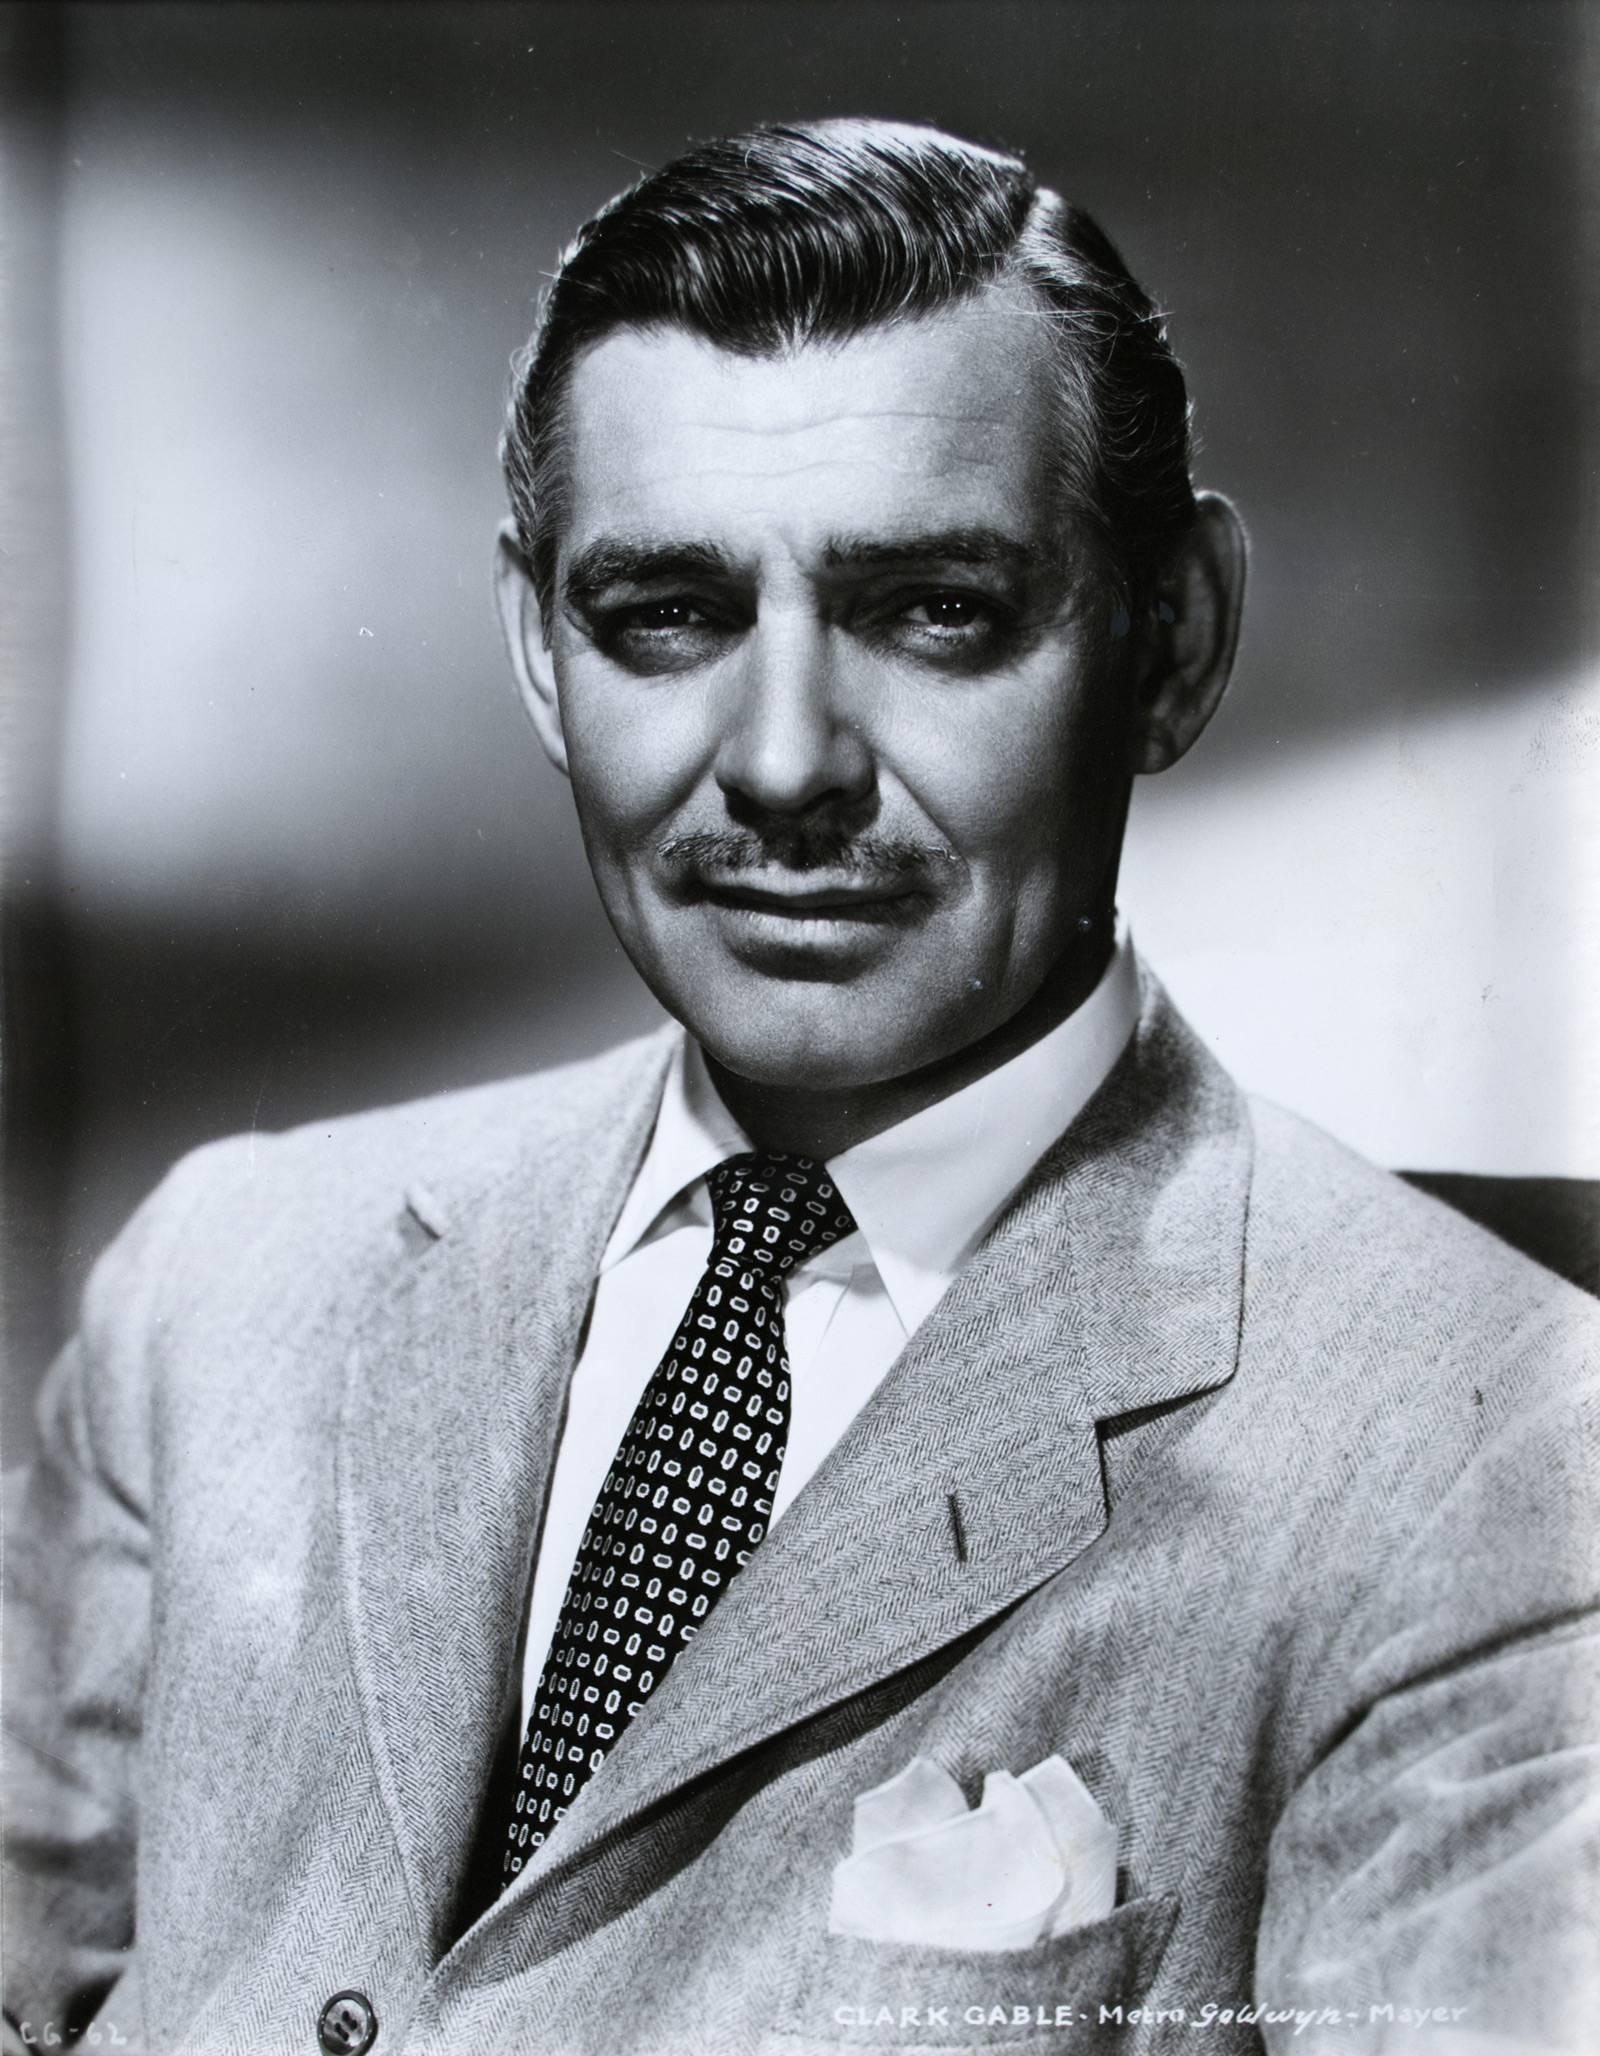 A framed portrait of the Hollywood leading man Clark Gable (1901 - 1960), accompanied by a check signed and dated 1944. From the Sunset branch of the Bank of America in Hollywood, California. A fine piece of memorabilia.